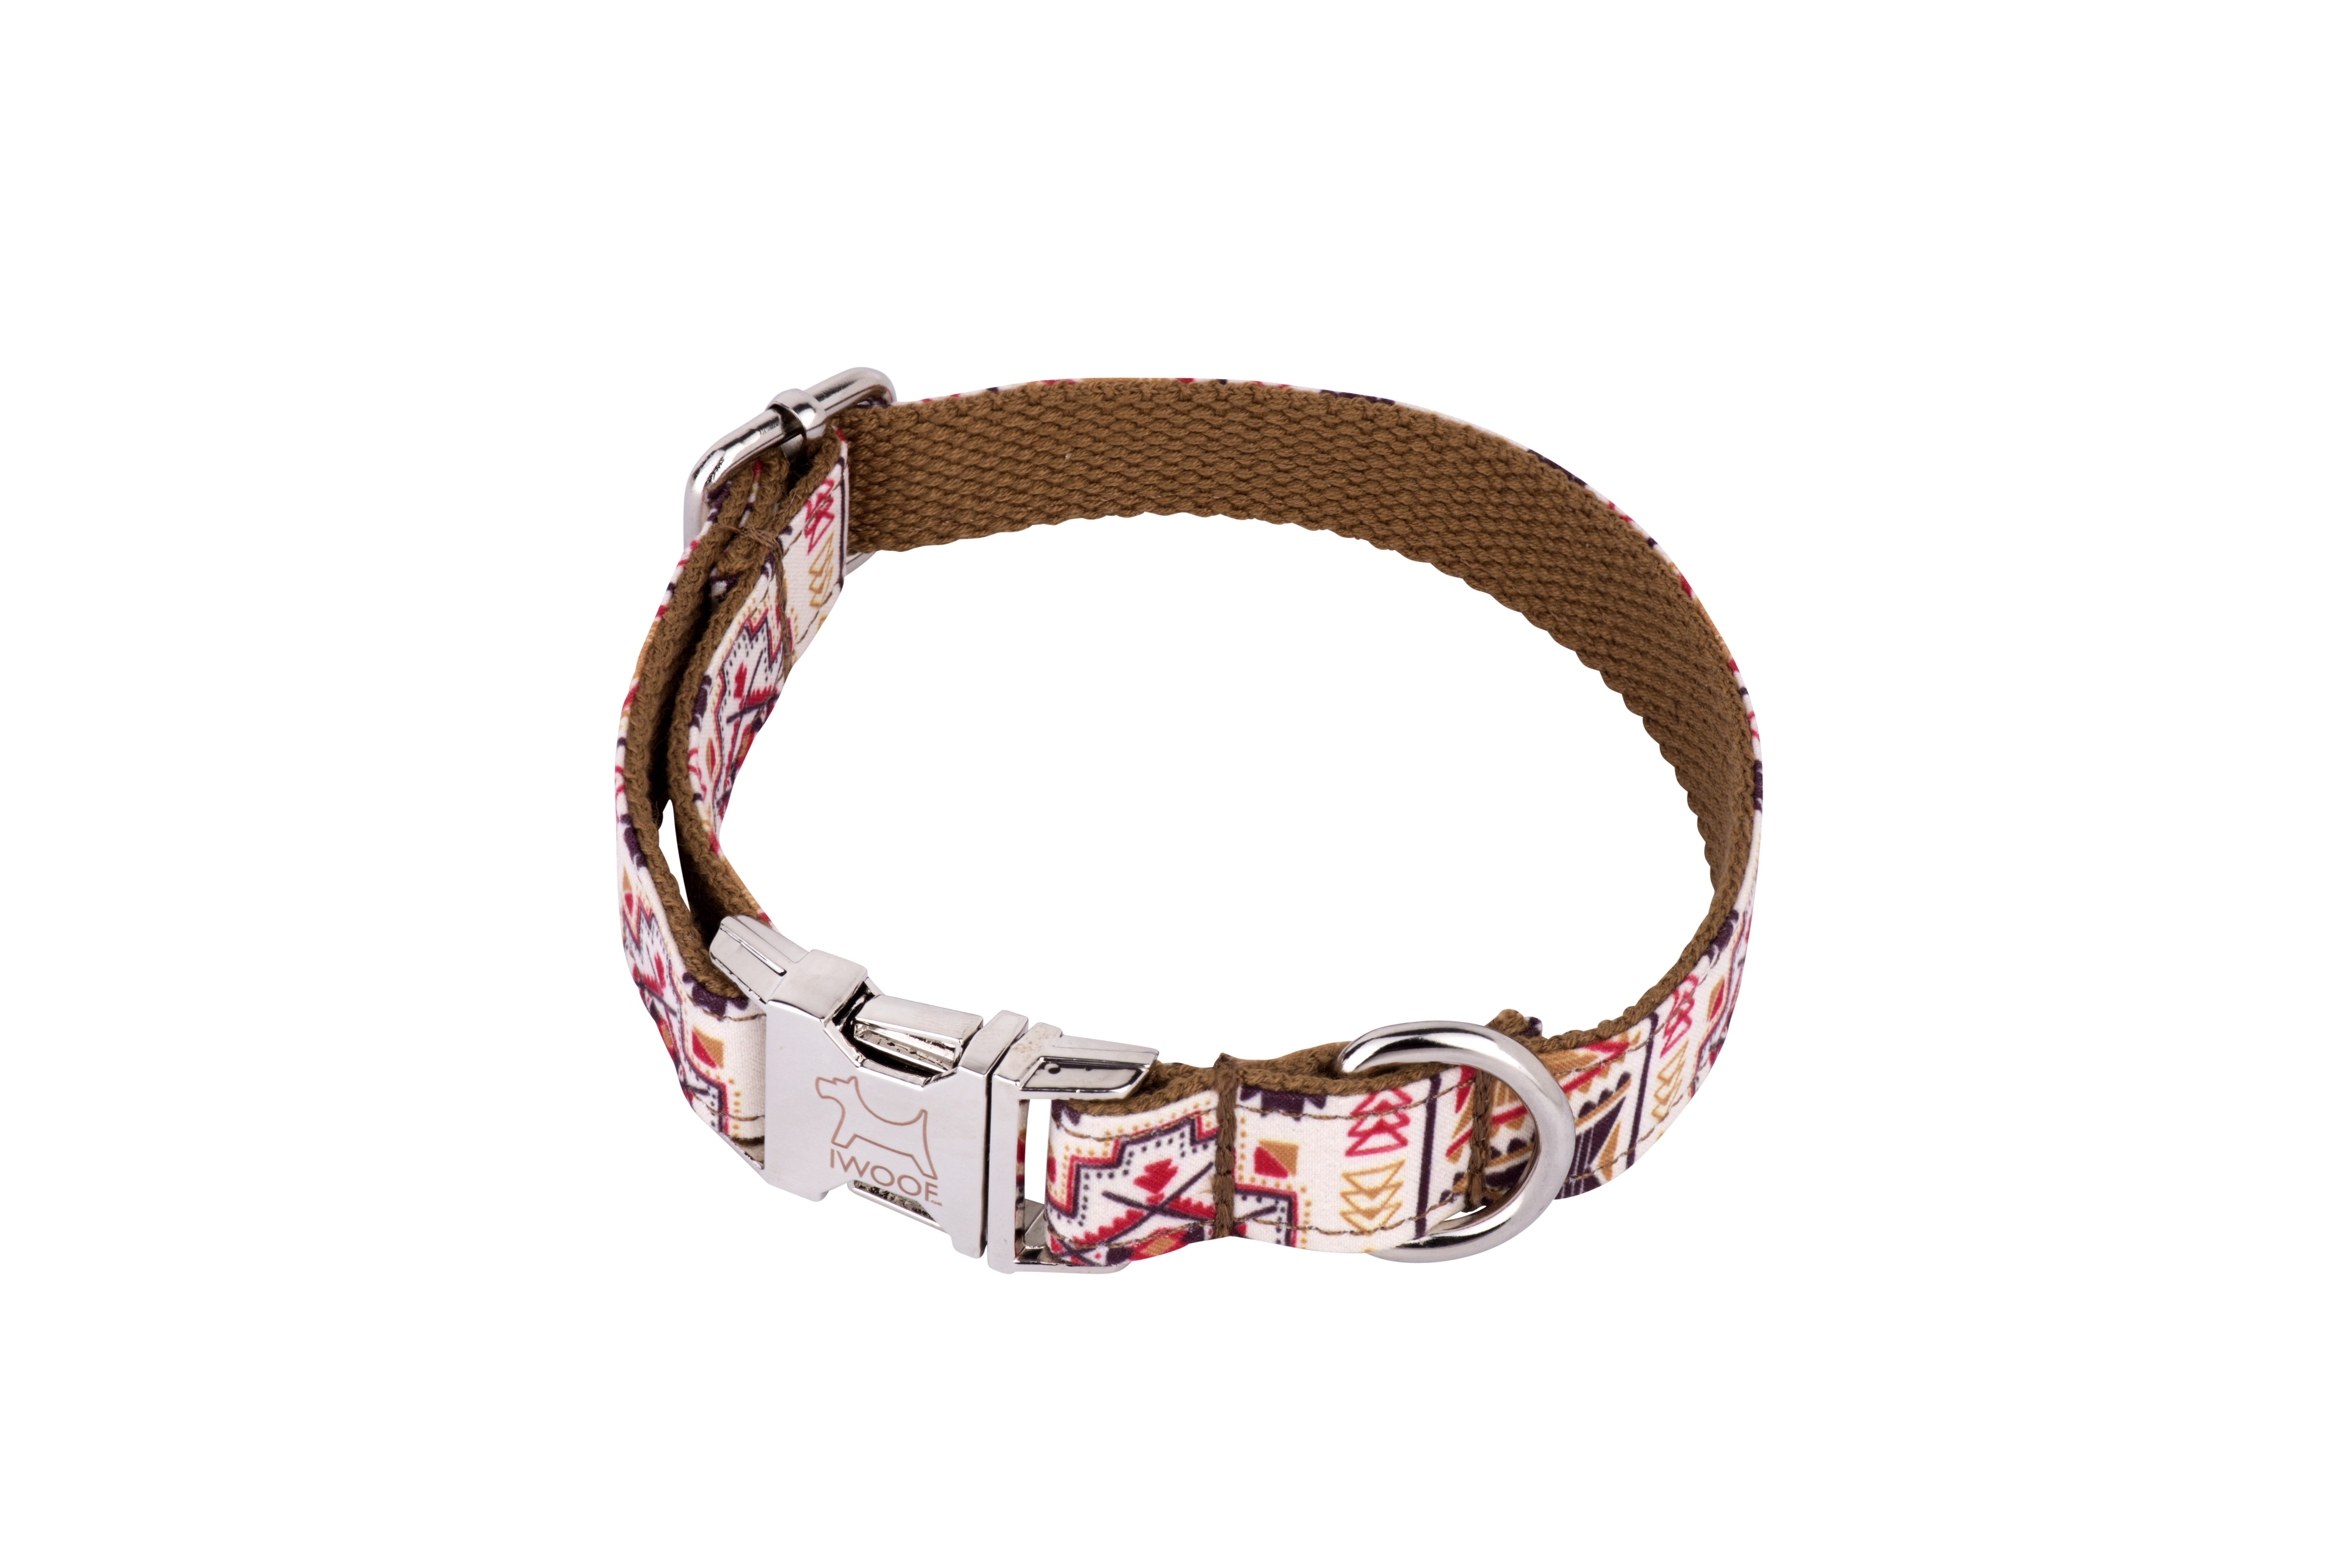 Aztec designer dog collar and matching dog lead set by IWOOF